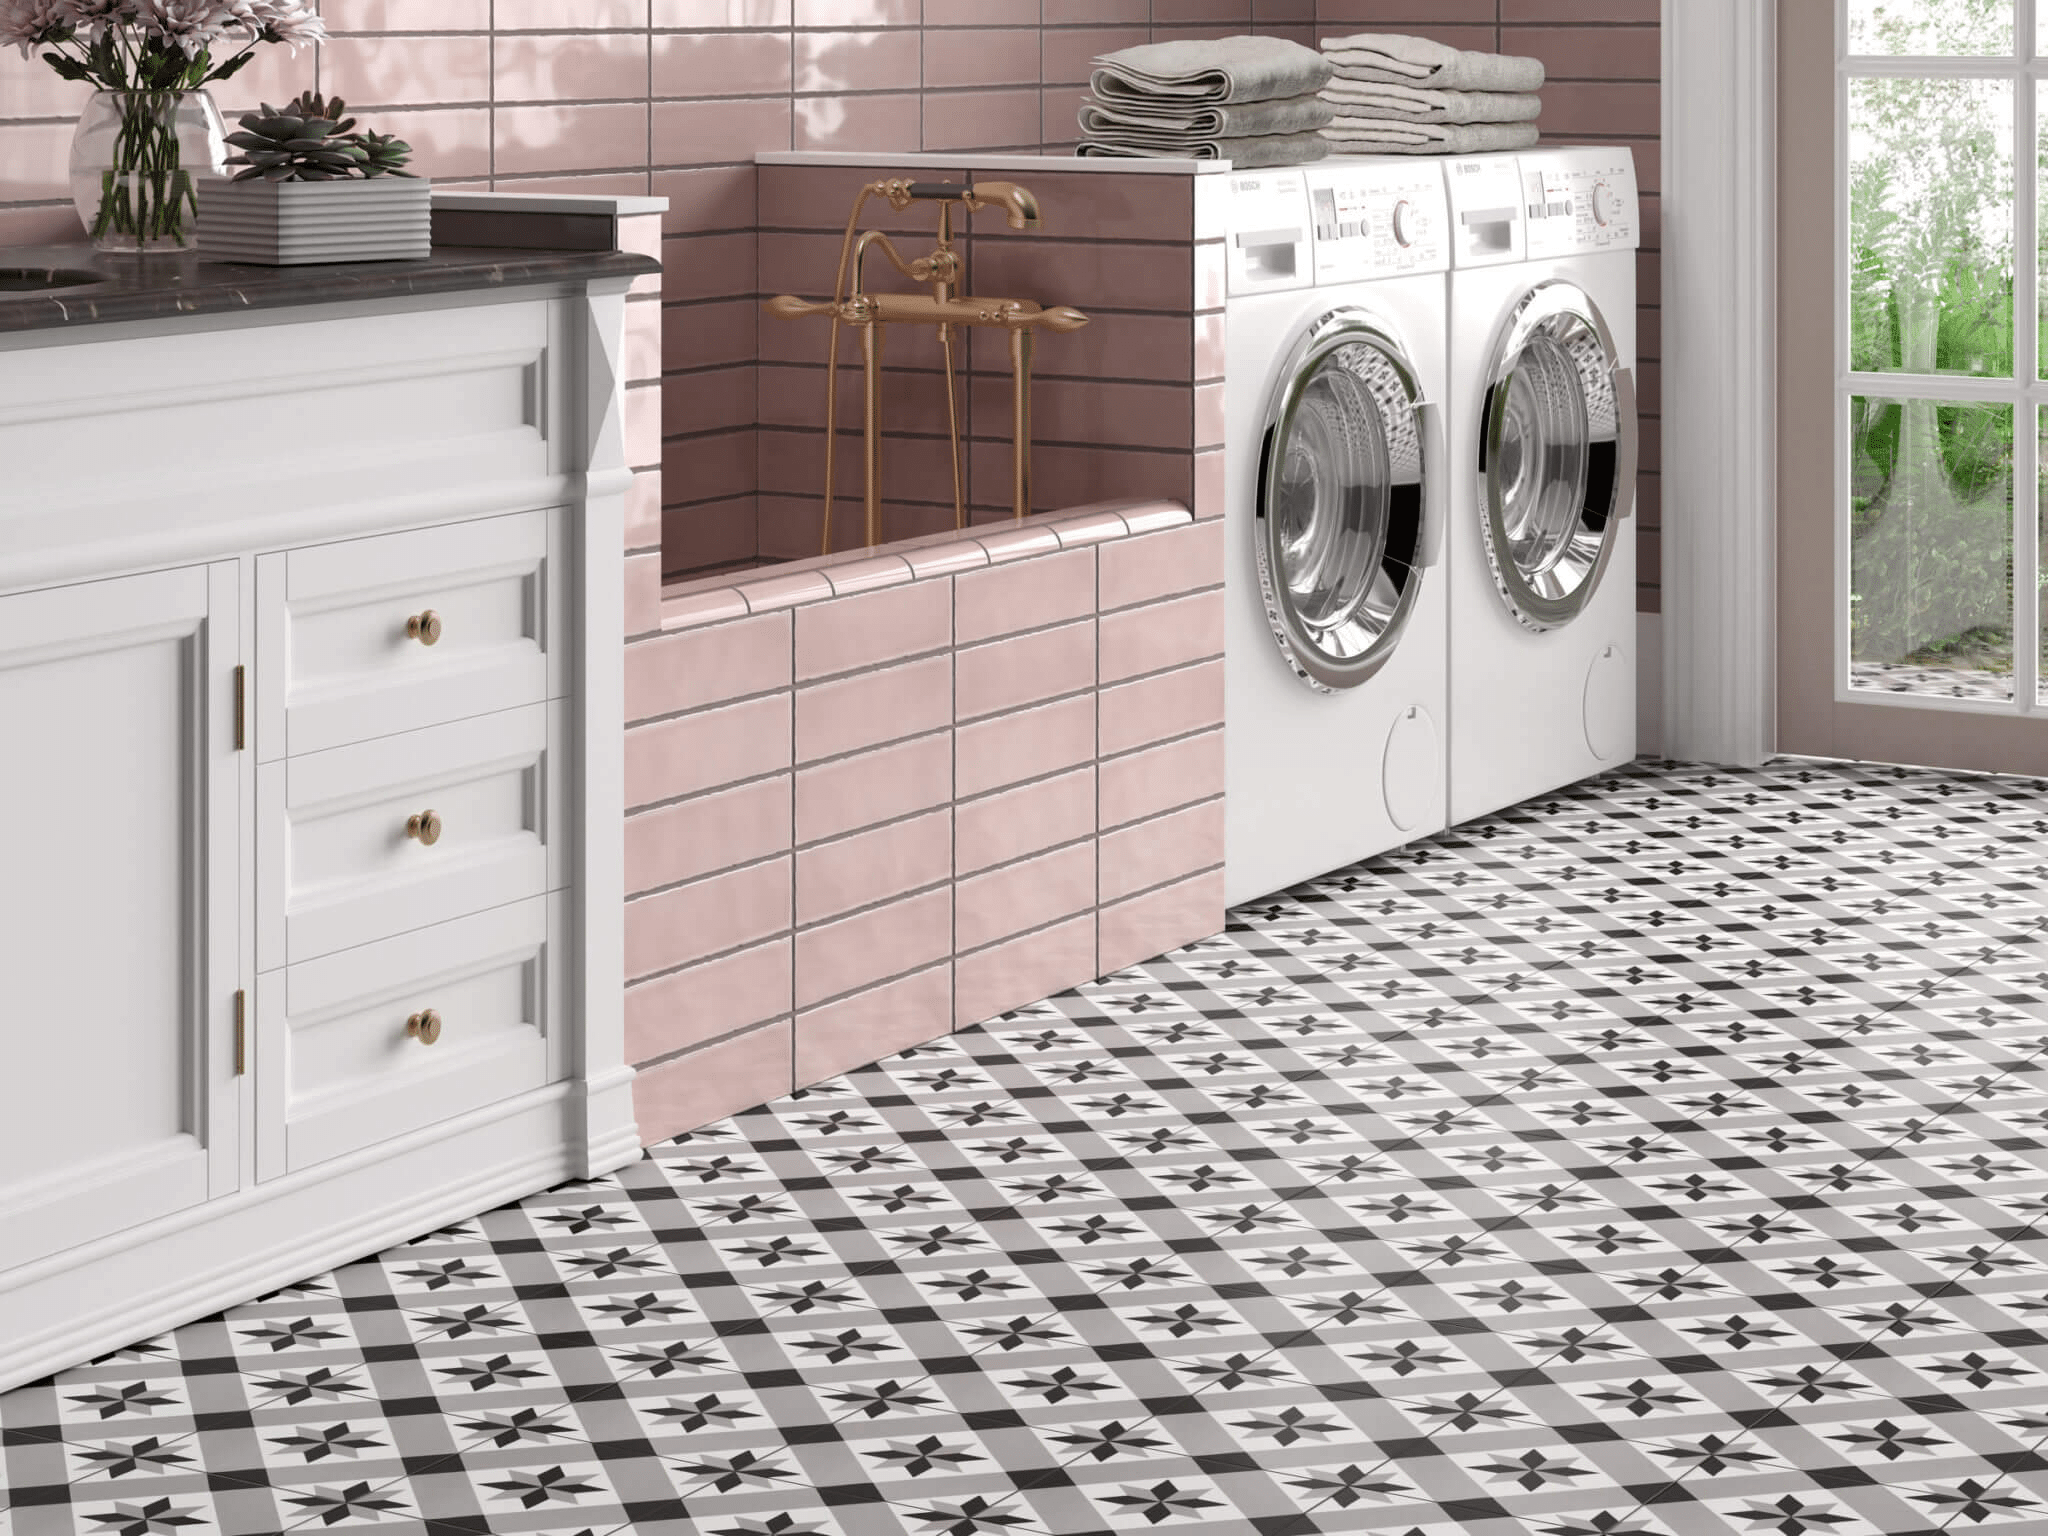 Laundry room with pink tile dog shower and black and white graphic tile flooring